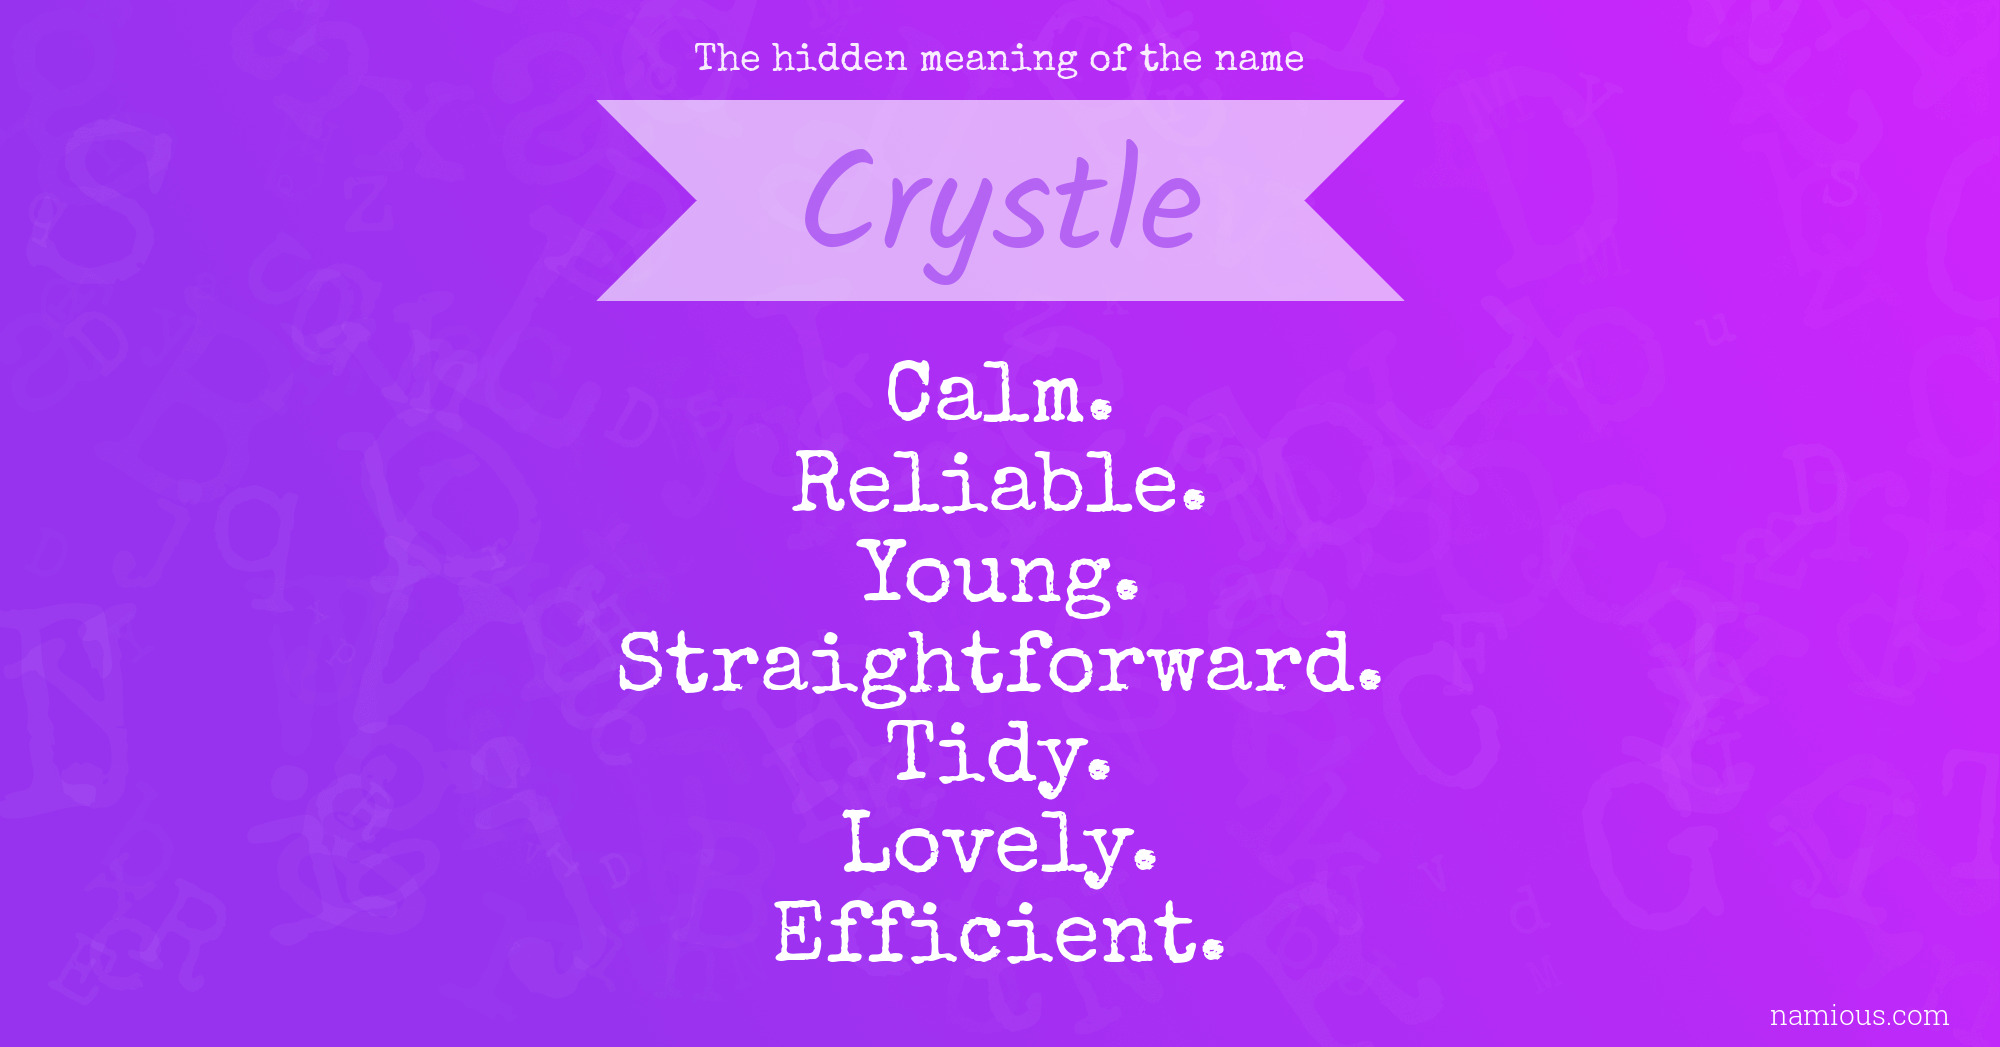 The hidden meaning of the name Crystle